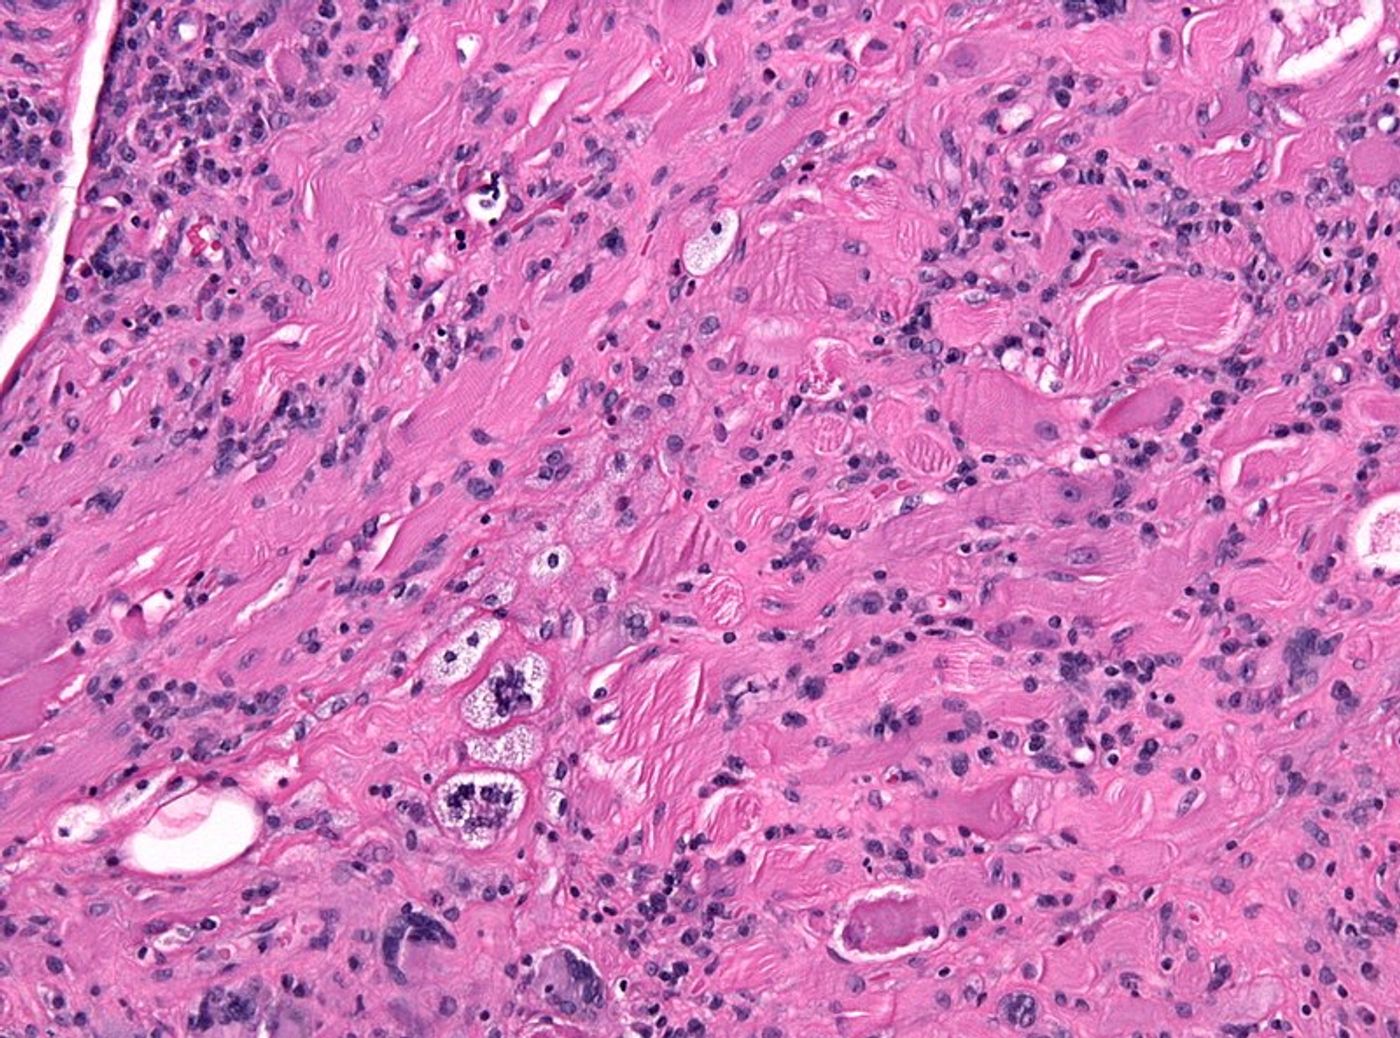 Histology section from rheumatoid arthritis tissue, showing inflammation and joint damage. Credit: Jensflorian